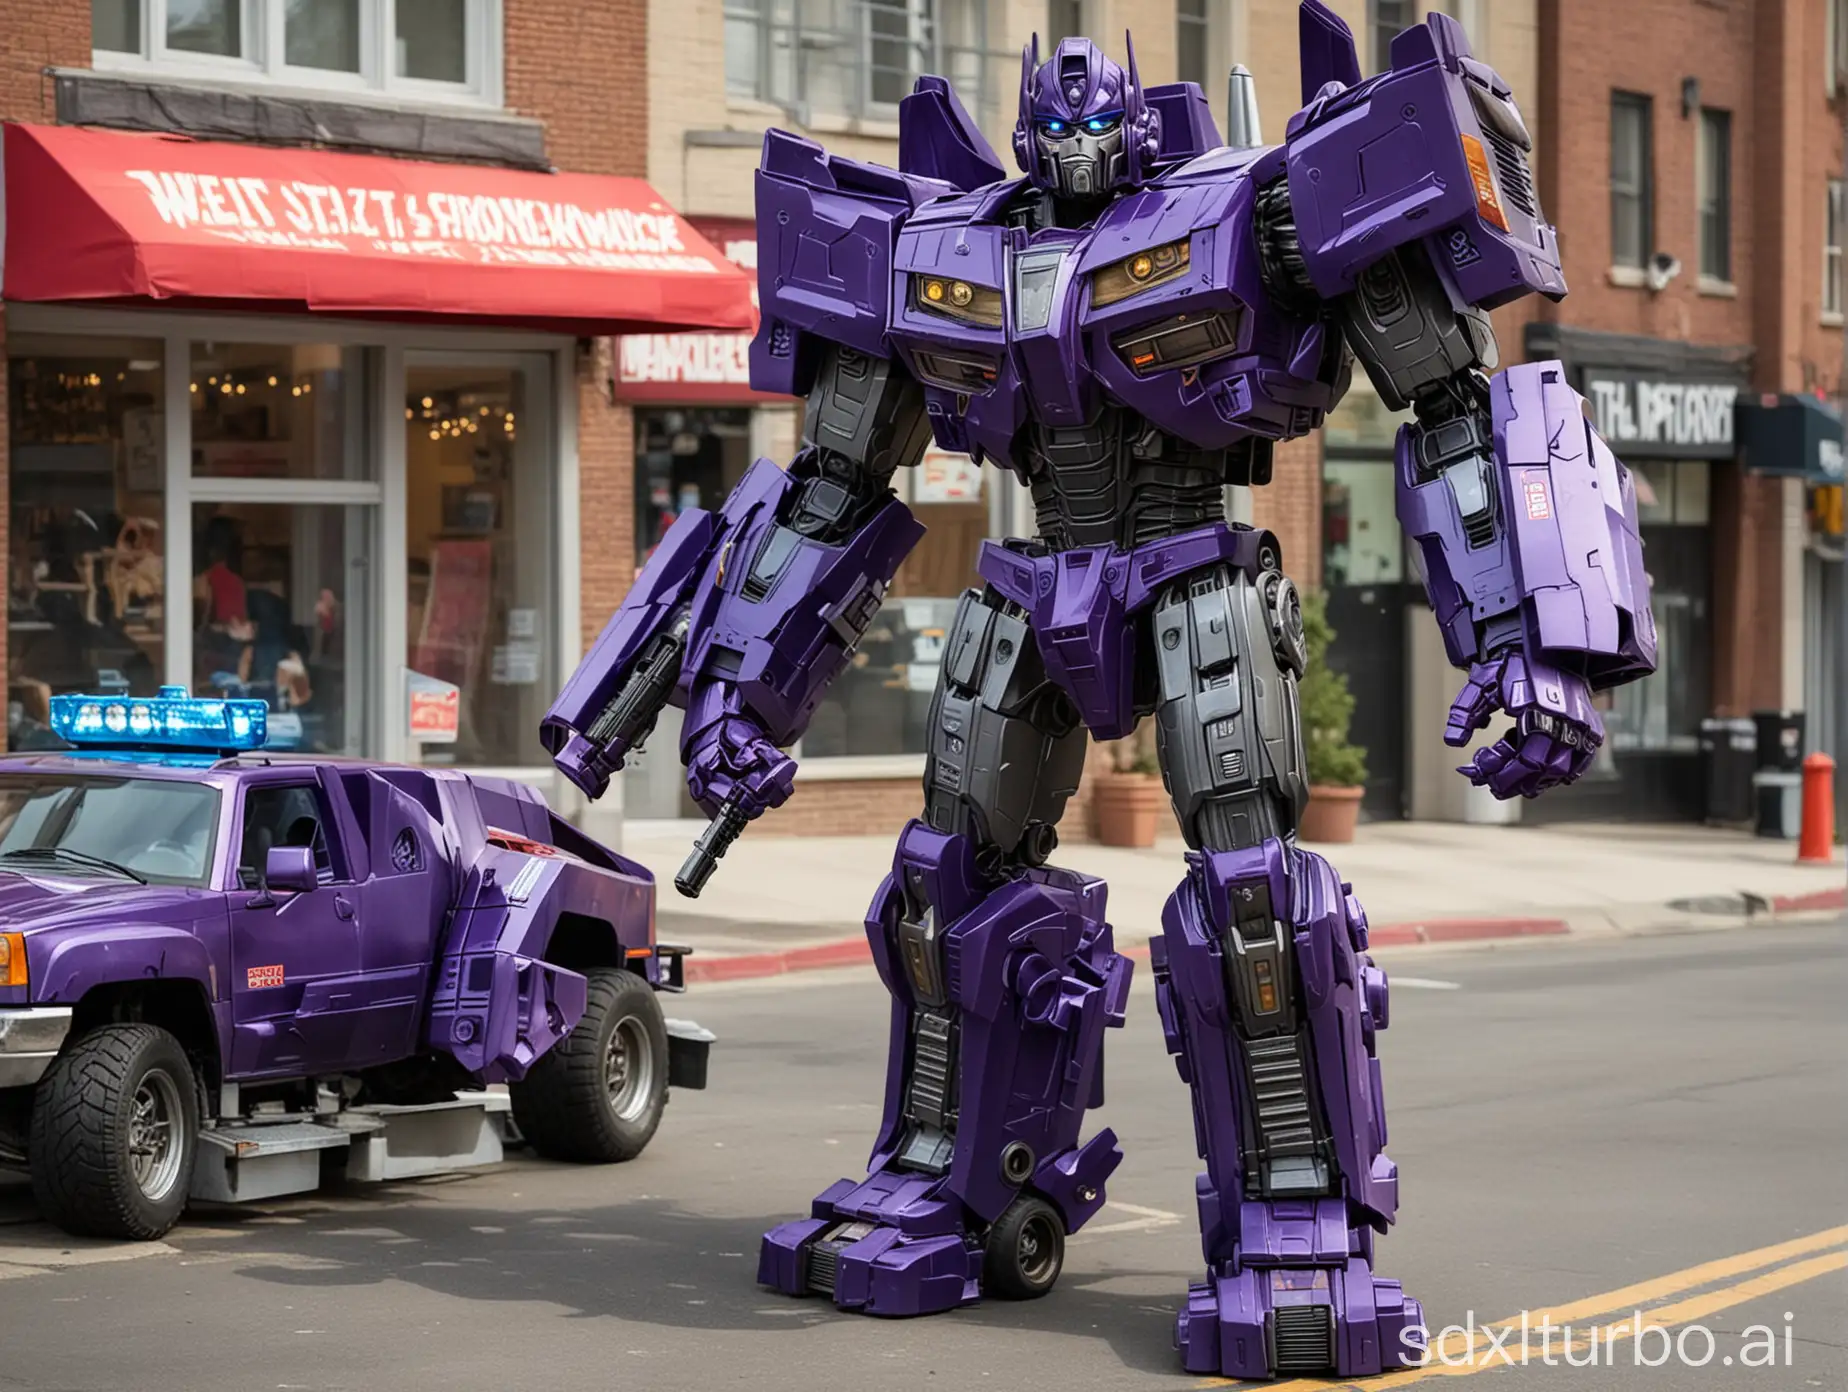 Mighty-Shockwave-Delivering-Takeout-Futuristic-Transformers-Artwork